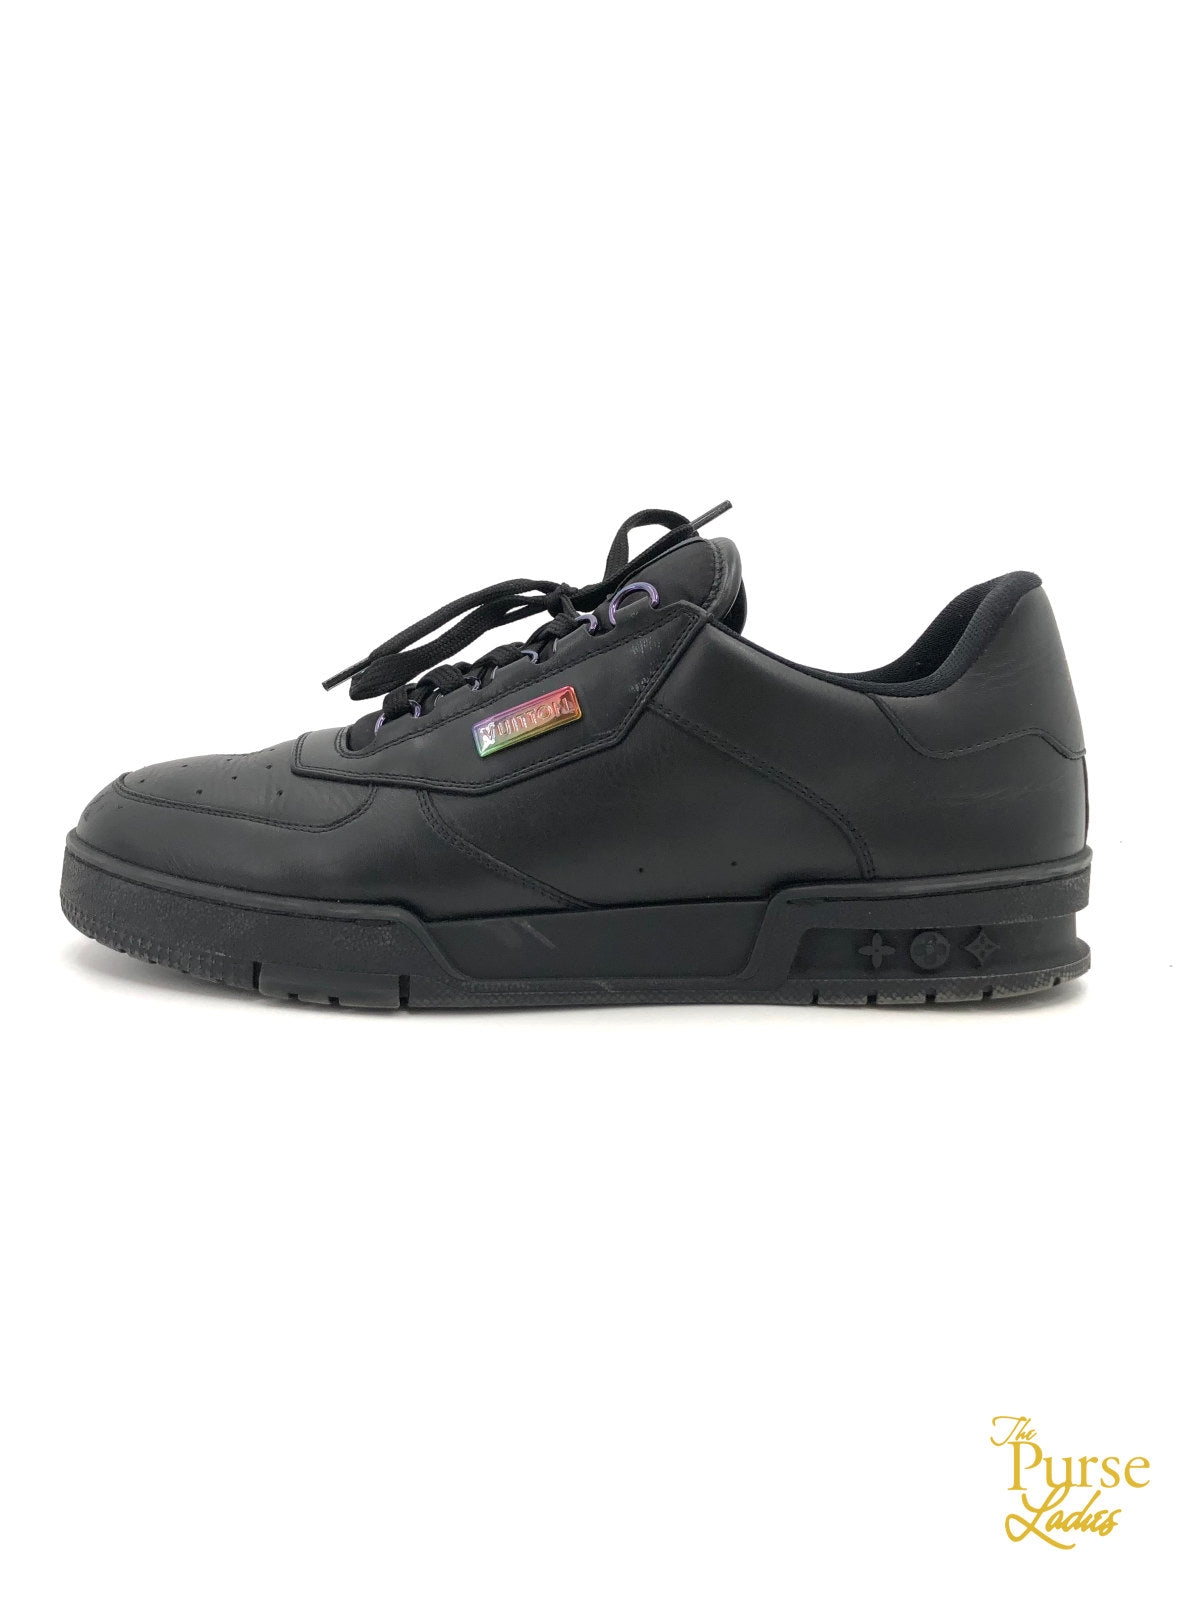 Leather trainers Louis Vuitton Black size 39 EU in Leather - 35637684